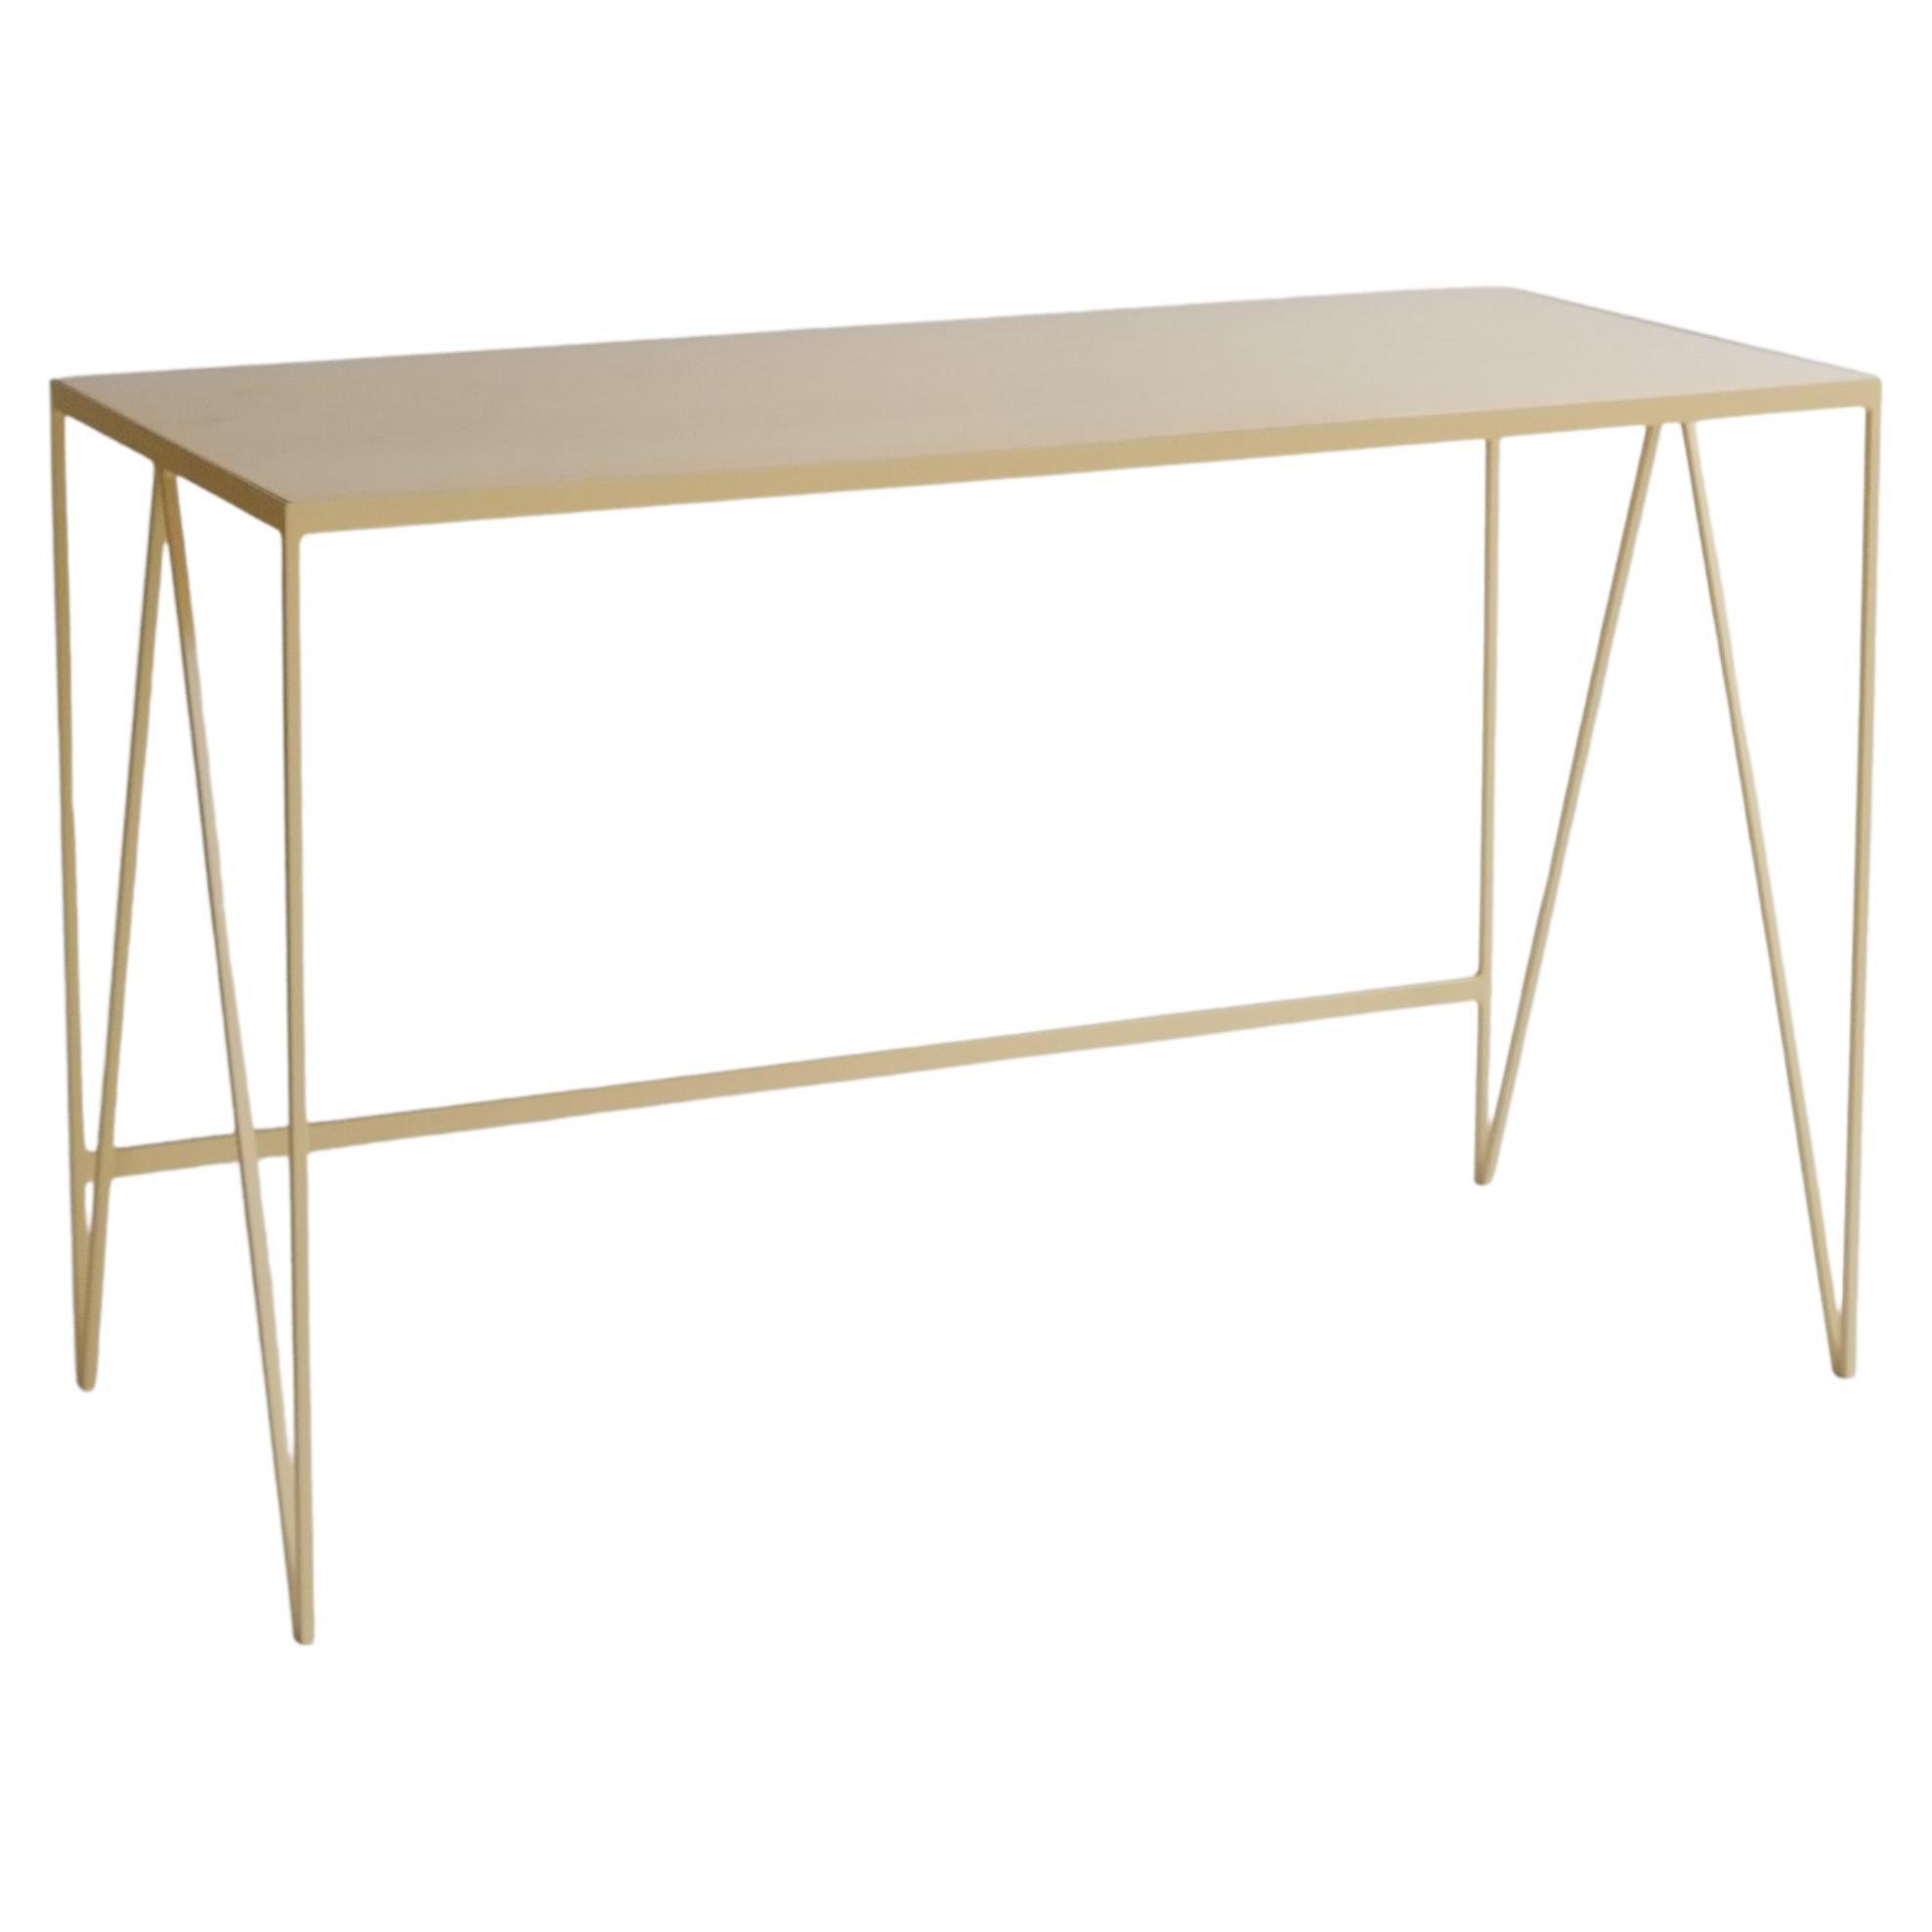 Butternut Study Desk with Birch Plywood Table Top, Cream Desk Customizable For Sale